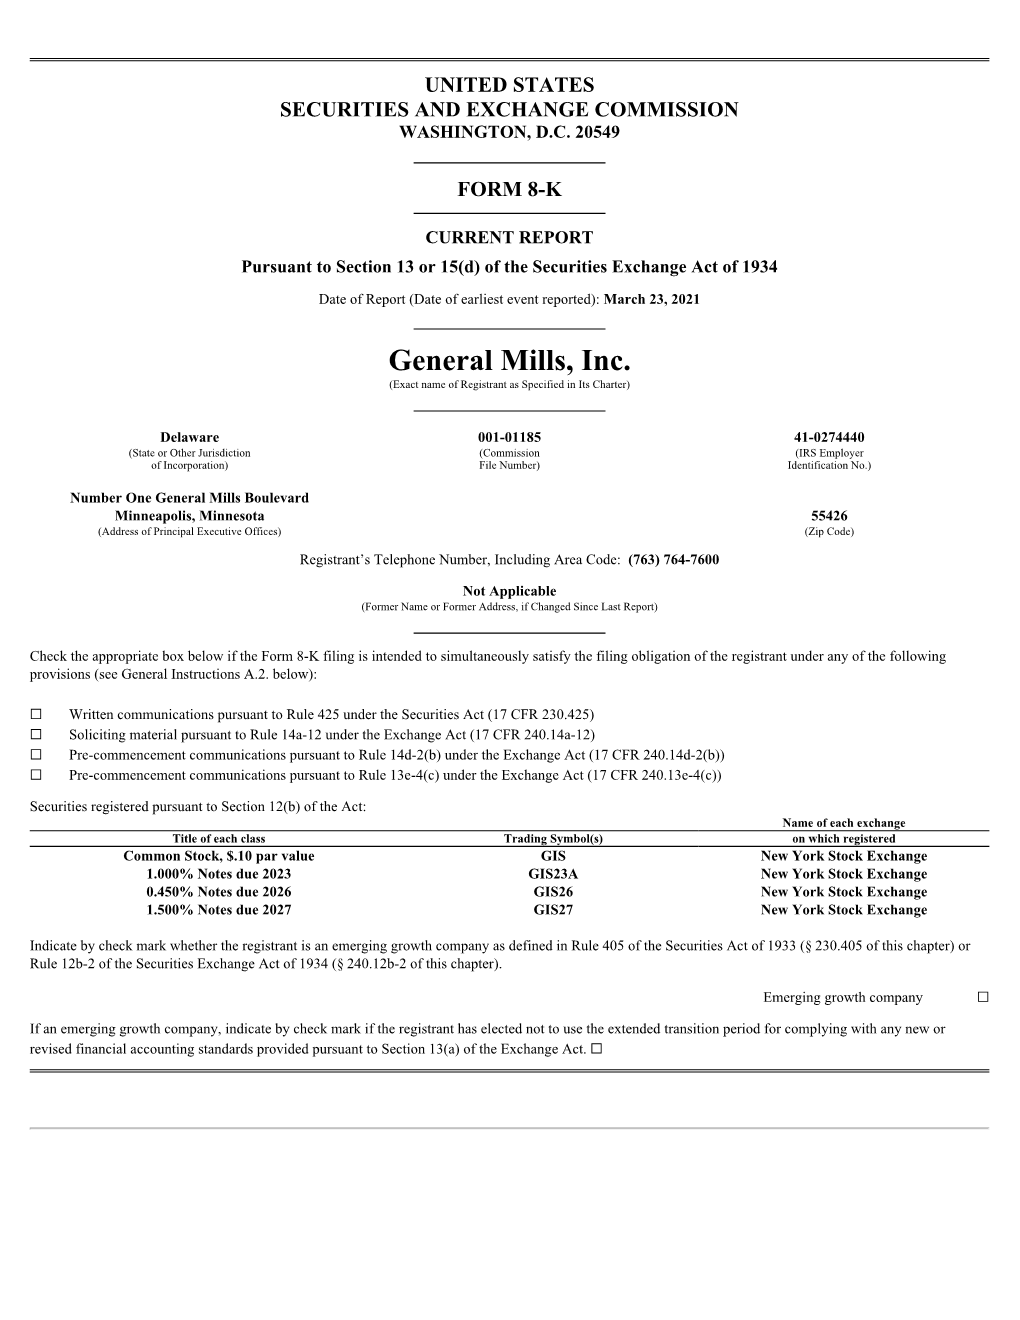 General Mills, Inc. (Exact Name of Registrant As Specified in Its Charter)